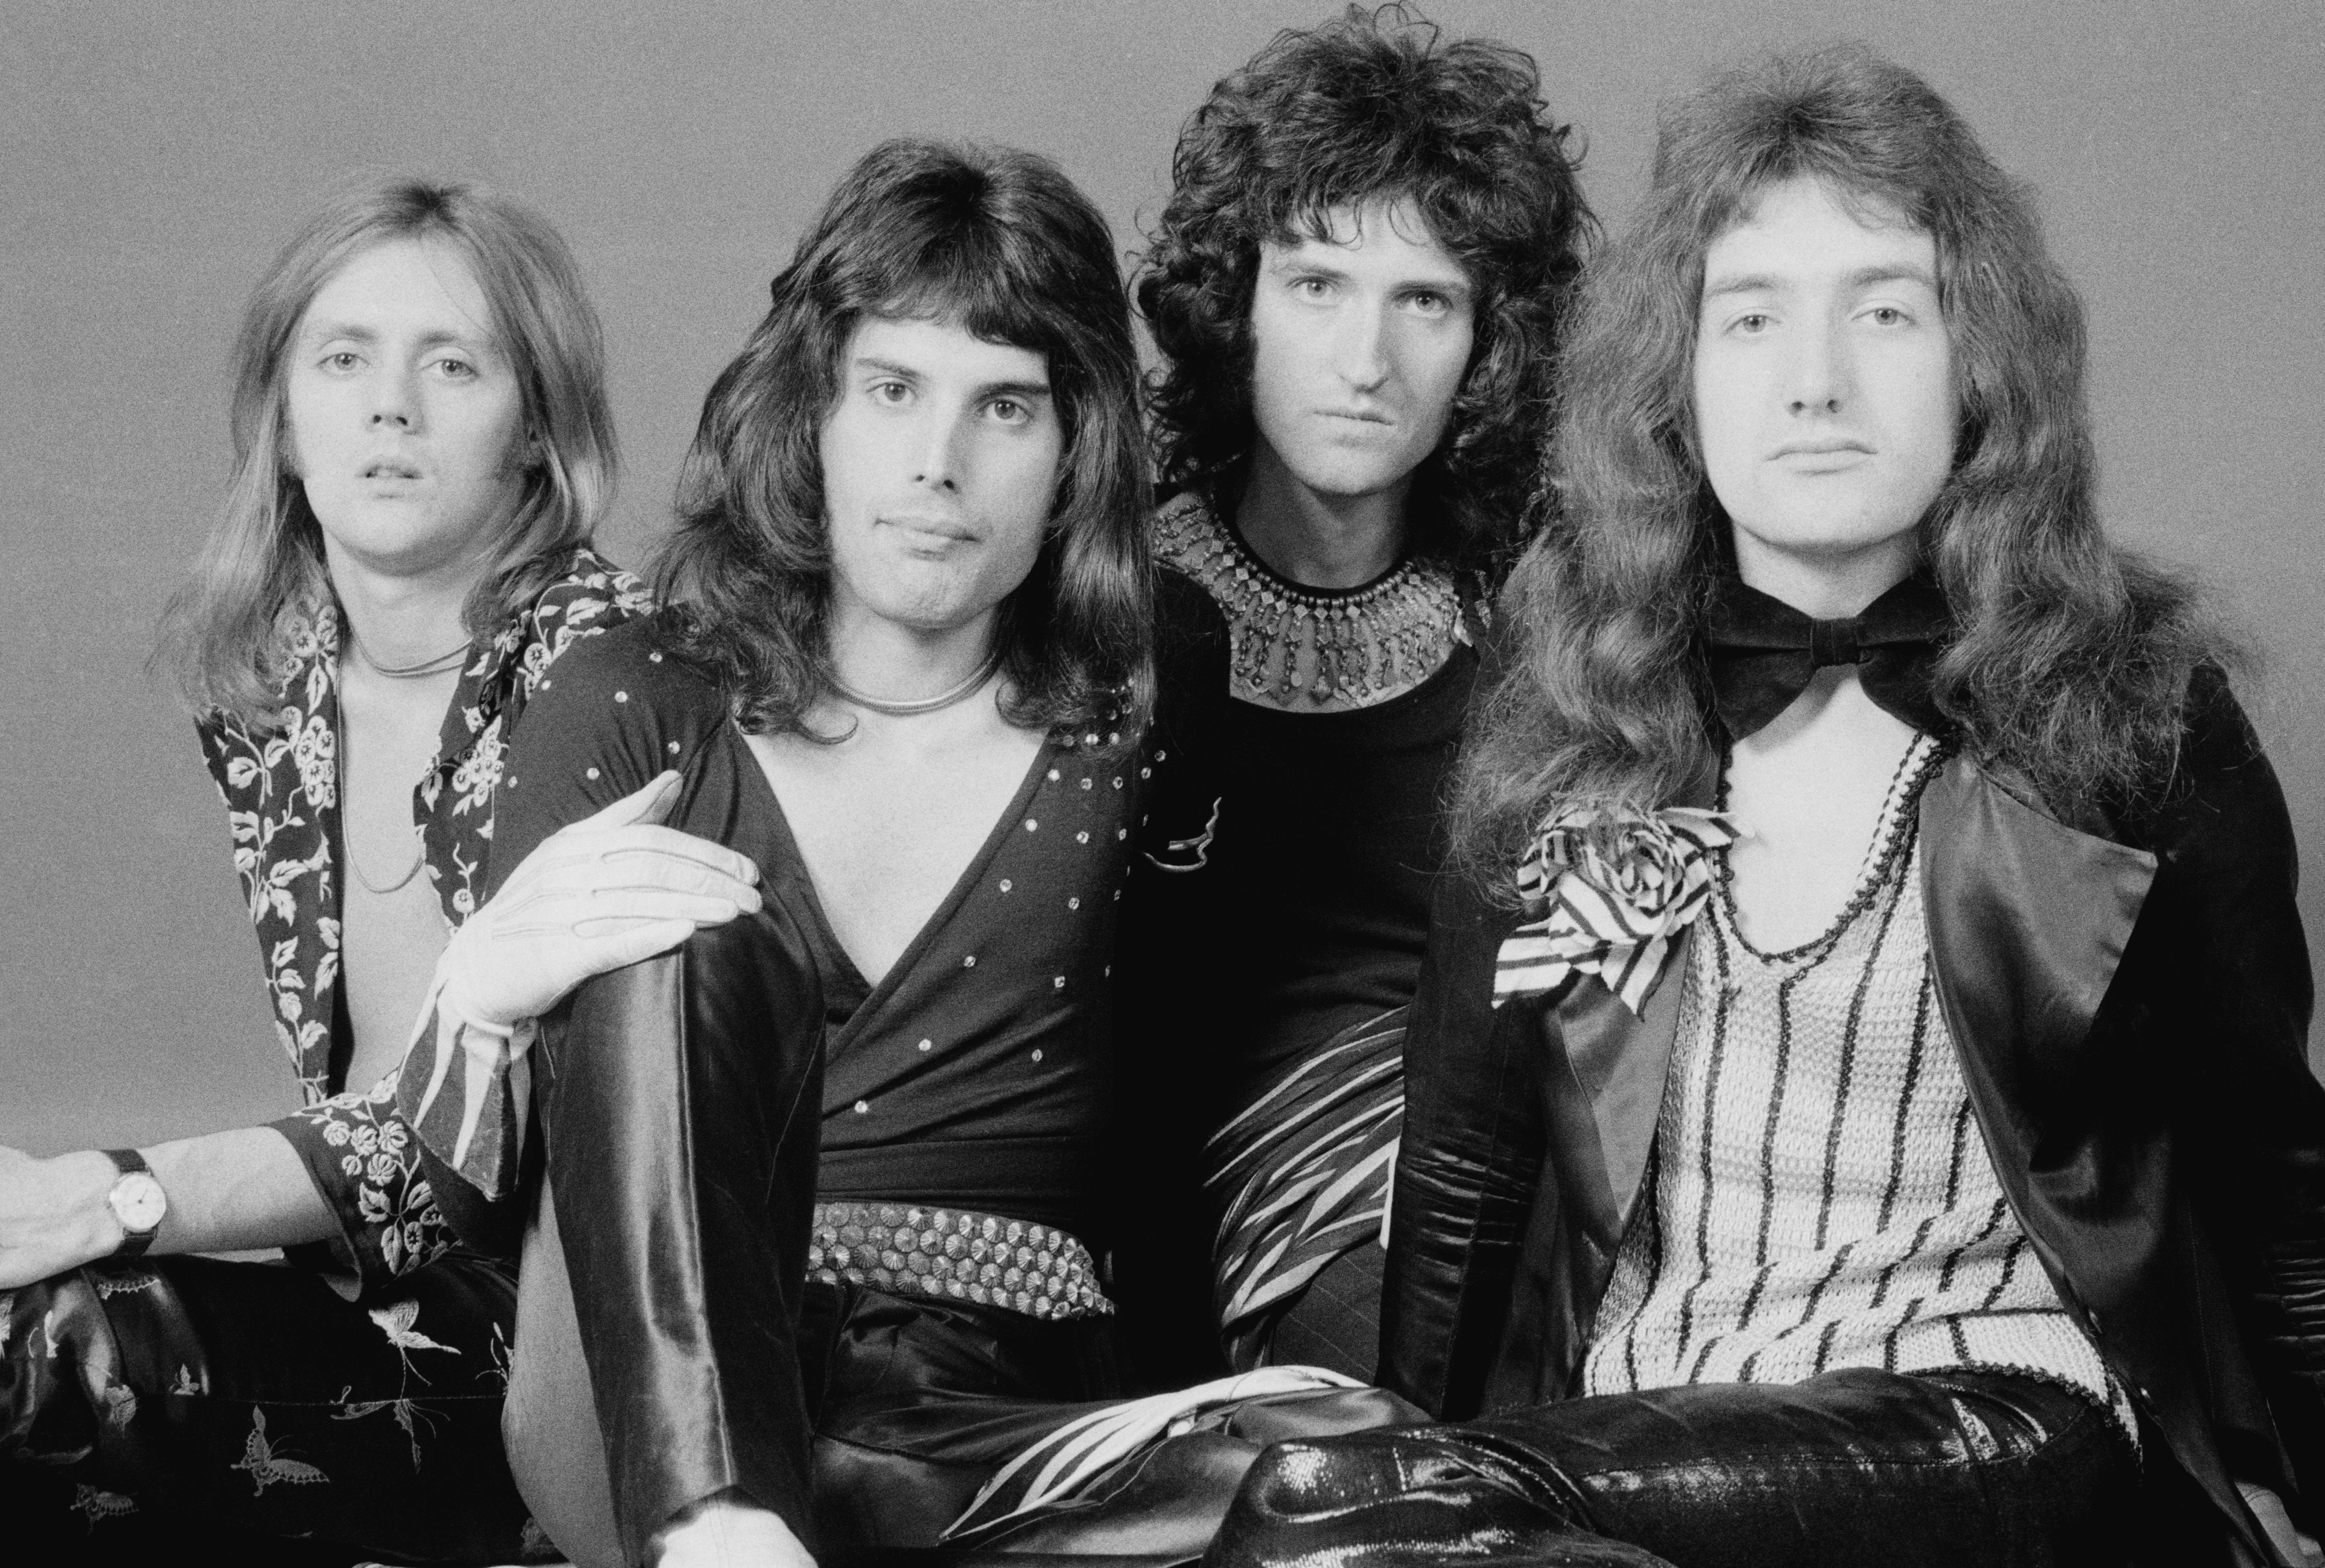 Freddie Mercury Was Part of Brian May and Roger Taylor's Entourage Forming Queen